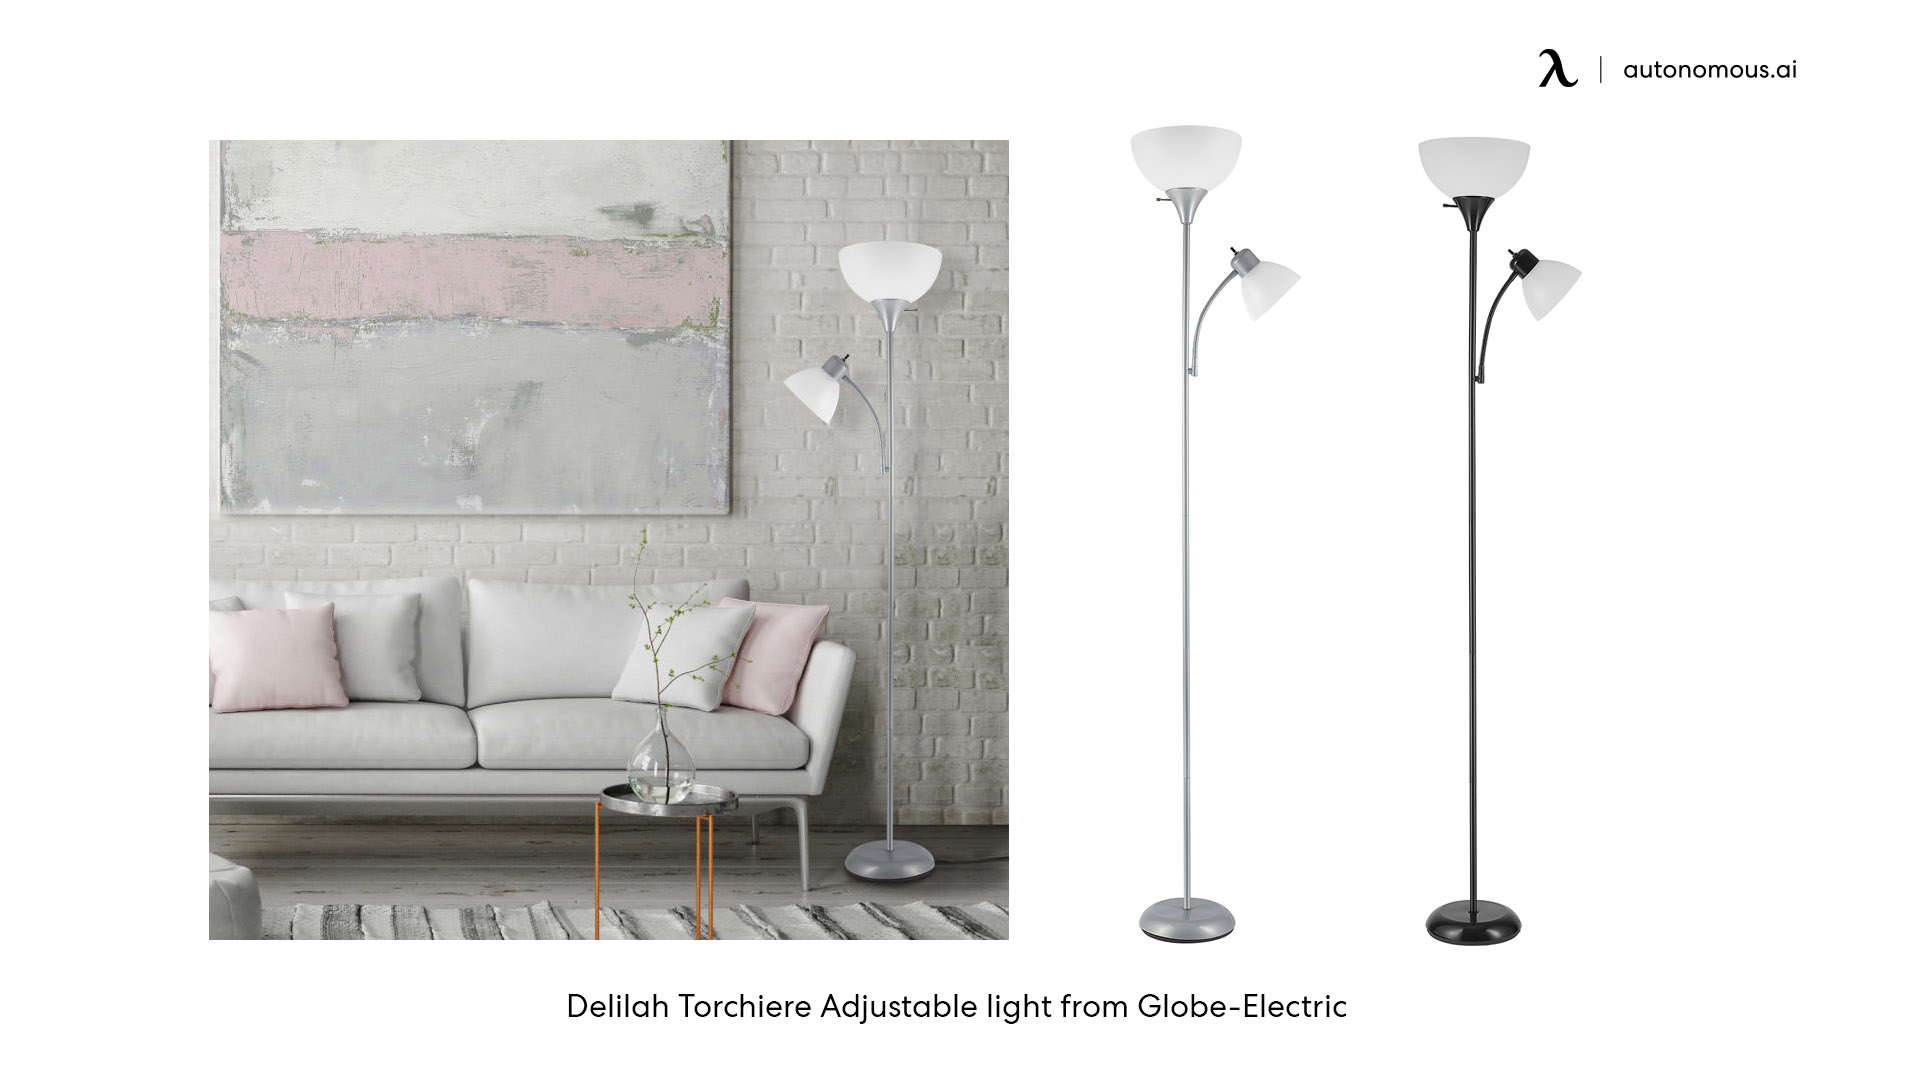 Delilah Torchiere Adjustable light from Globe-Electric